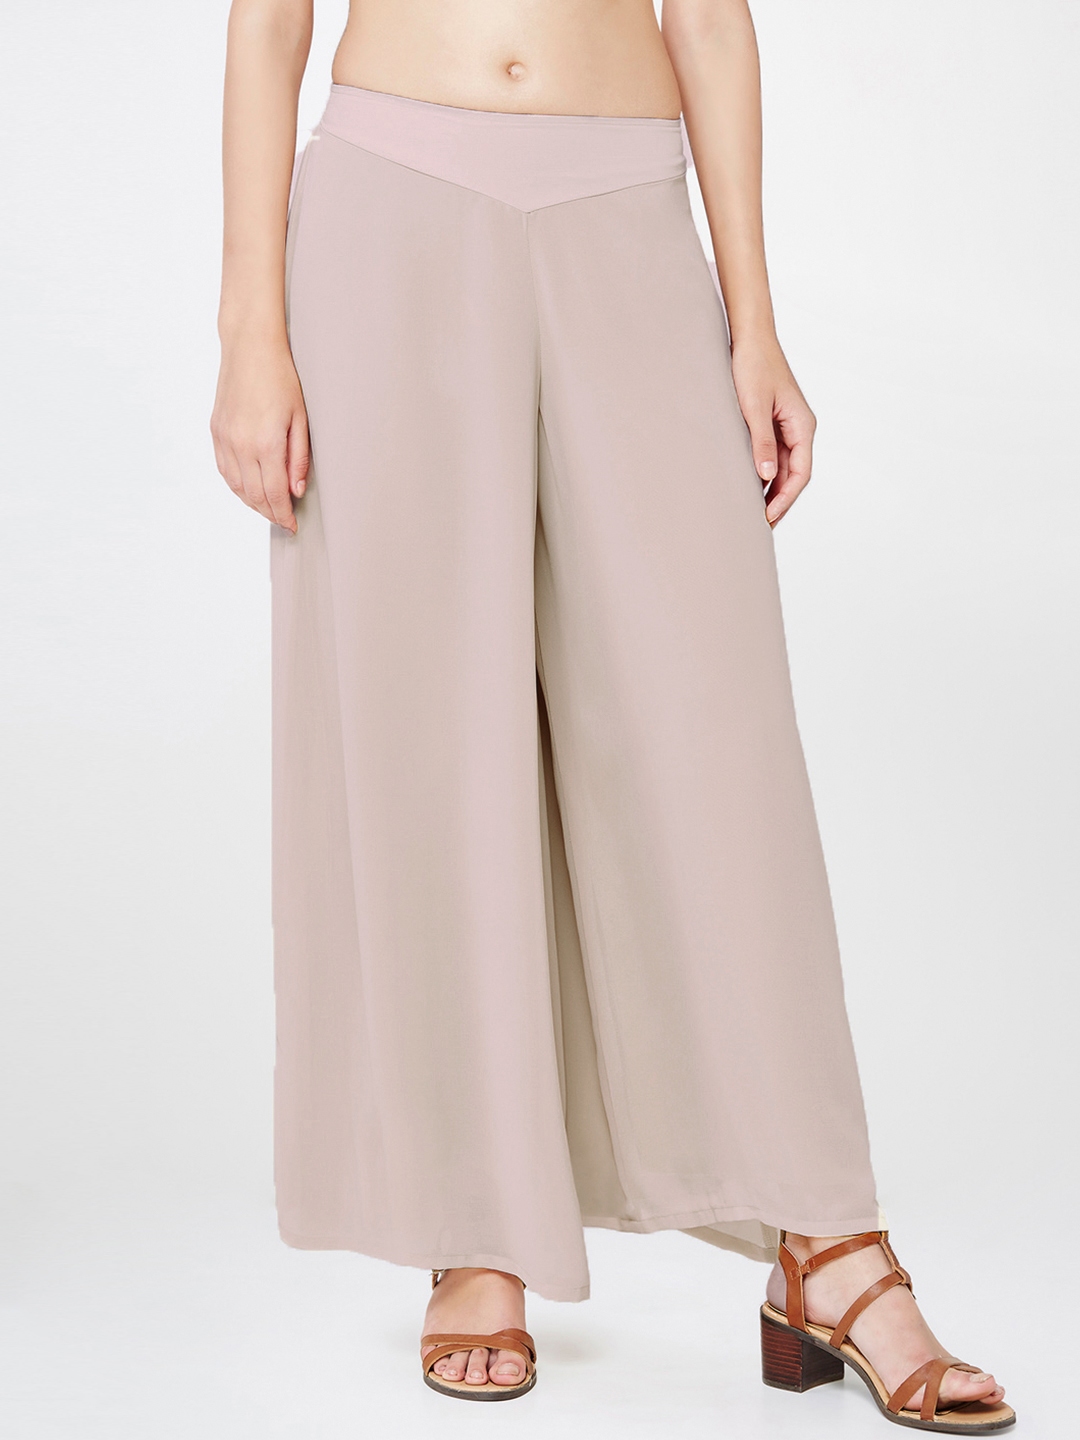 Buy AND Beige Palazzo Trousers - Palazzos for Women 1733206 | Myntra